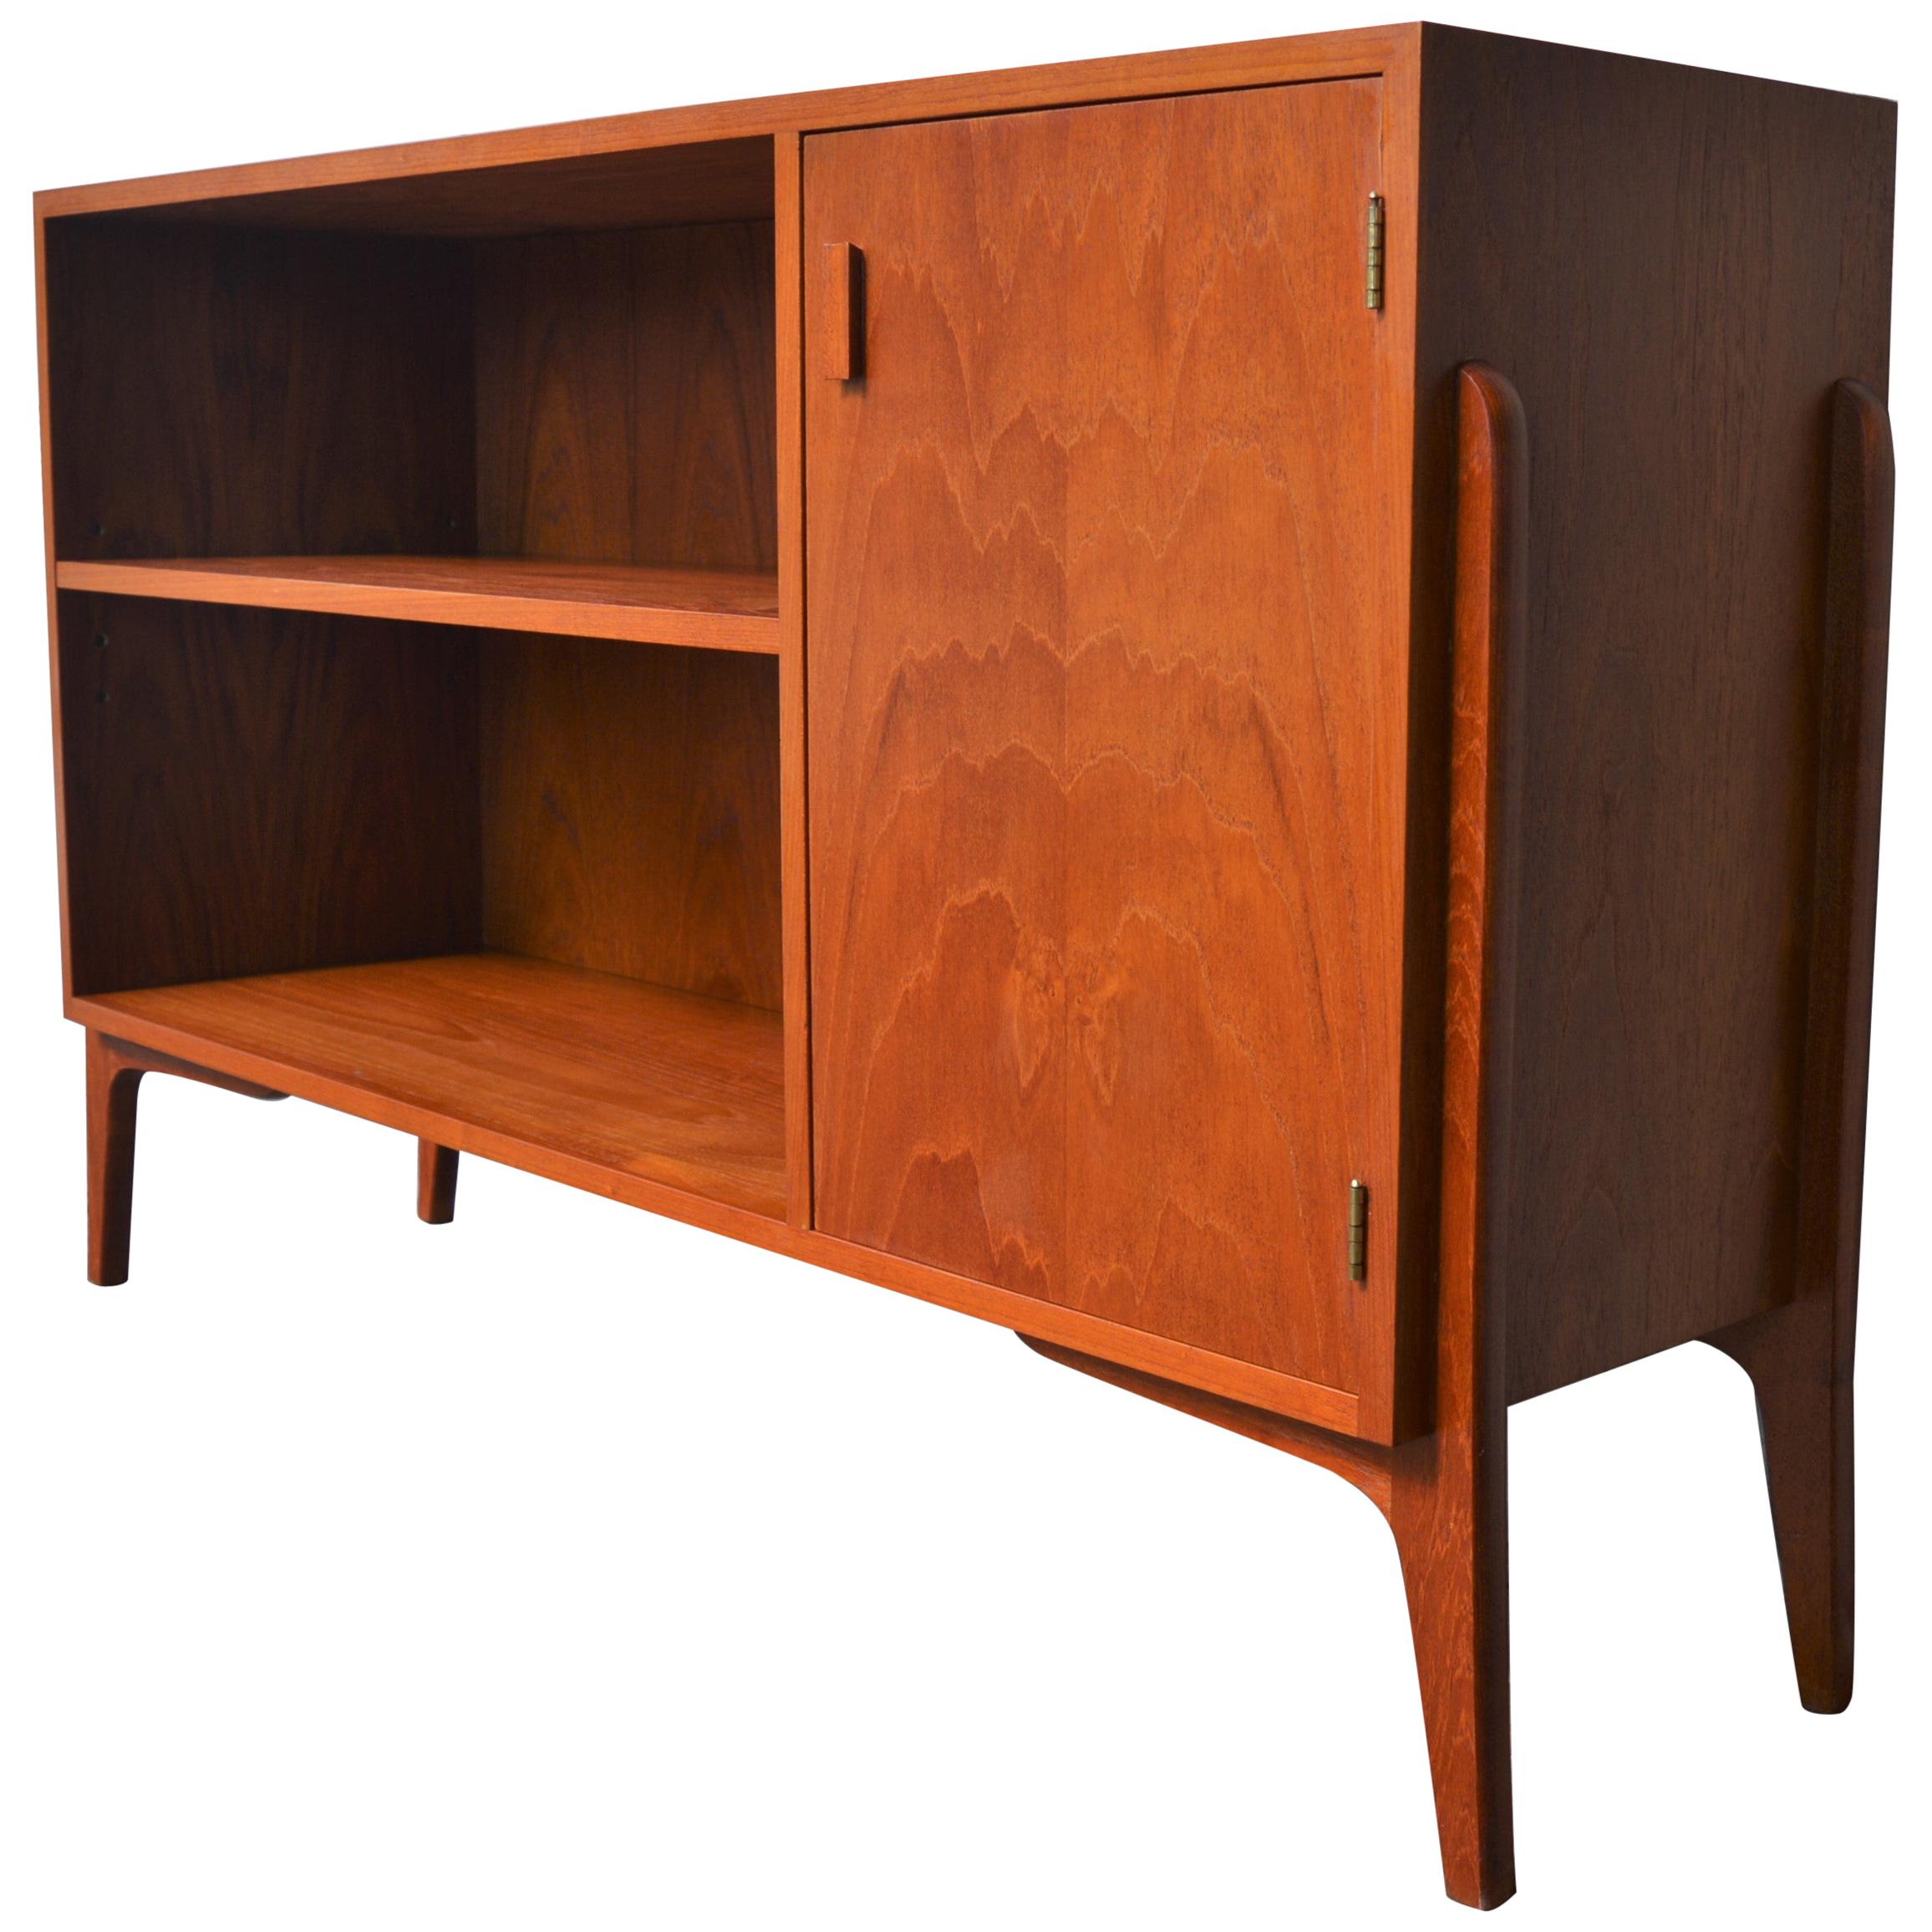 Danish Modern Teak Room Divider or Cabinet with Exposed Legs and Finished Back